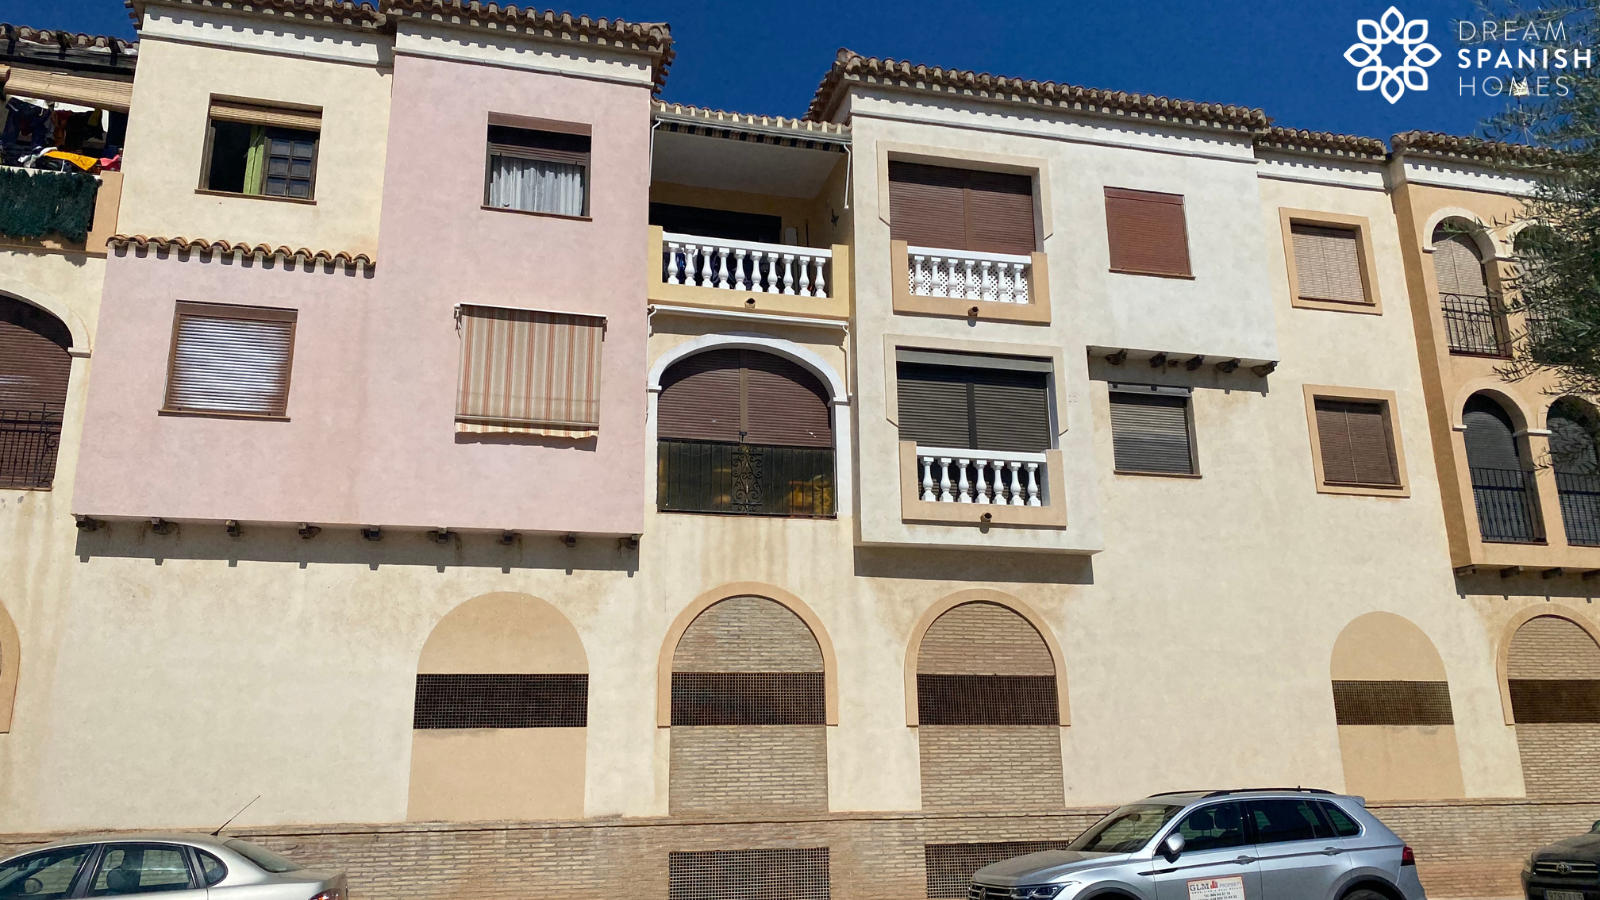 Apartment 2 Bedrooms, 1 Bathroom Including Parking 100m From The Beach 8